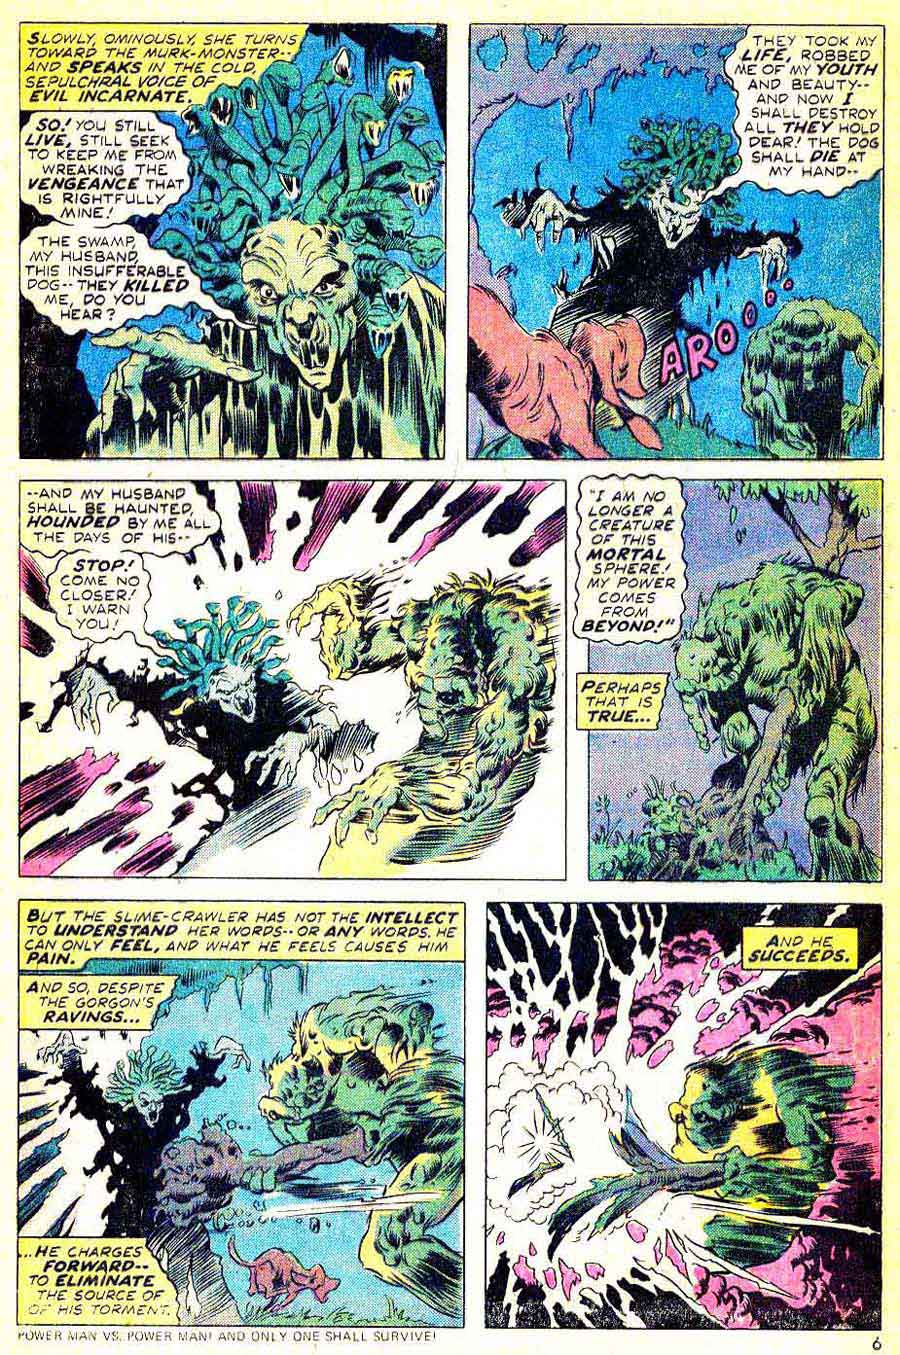 Man-Thing v1 #10 marvel 1970s bronze age comic book page art by Mike Ploog